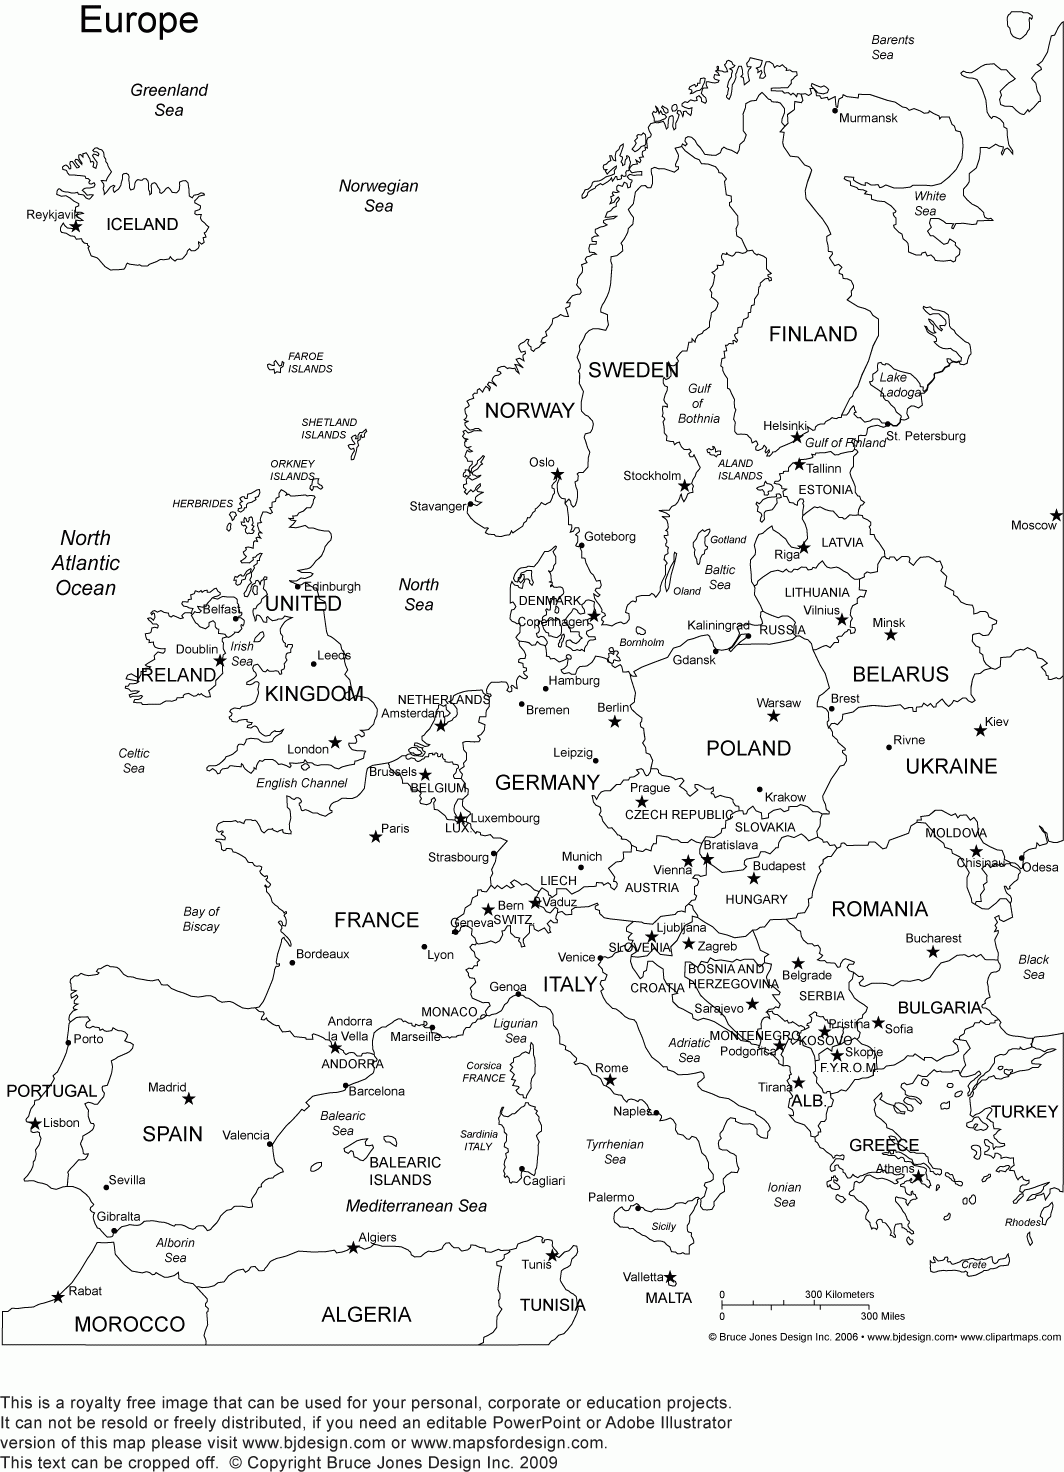 Europe Map Coloring Pages Coloring Home